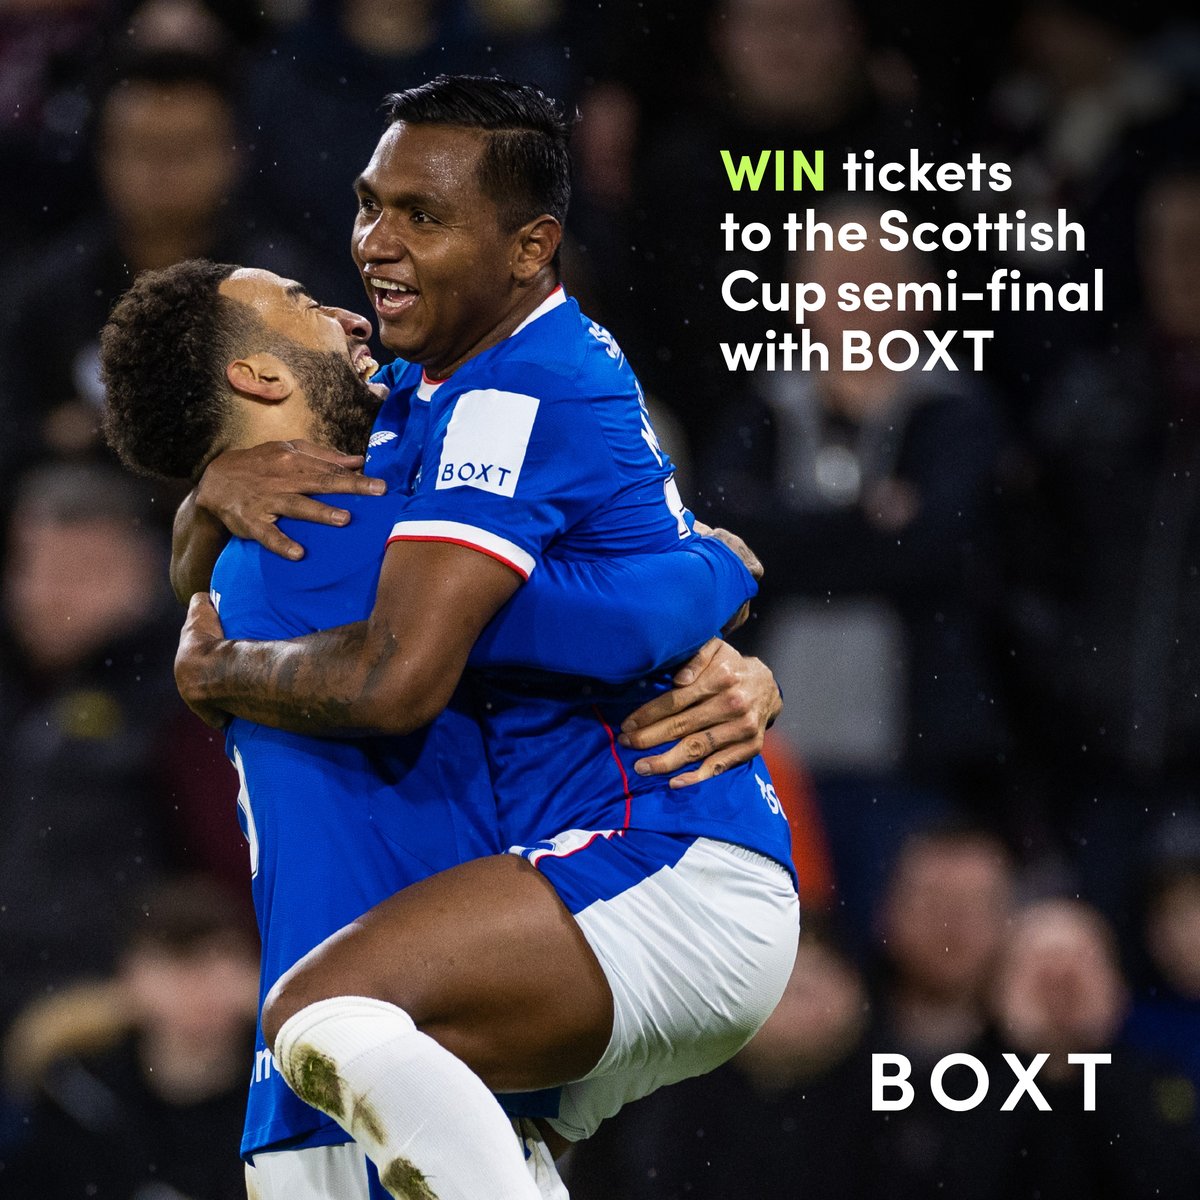 🚨@RangersFC FANS!🚨 We’re giving you the chance to WIN 2 x tickets to the Old Firm Scottish Cup semi-final at Hampden Park 🎟🏟 To enter: ✅ Follow @weareboxt ✅ Tag 3 friends ✅ Like & retweet this post Competition ends 26/04/23. T&Cs apply. #RangersFC